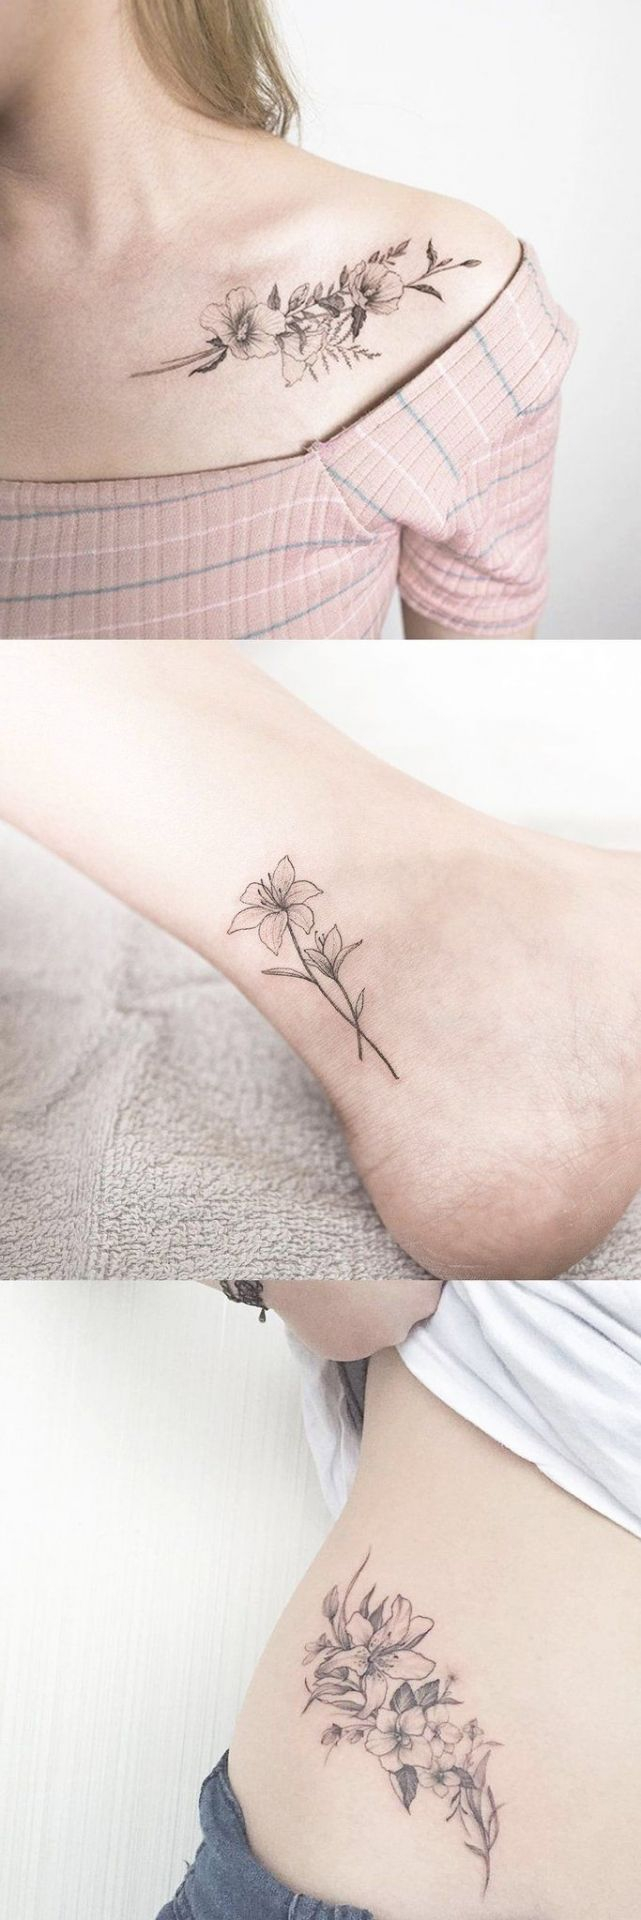 30 Simple And Small Flower Tattoos Ideas For Women Delicate with regard to dimensions 641 X 1920